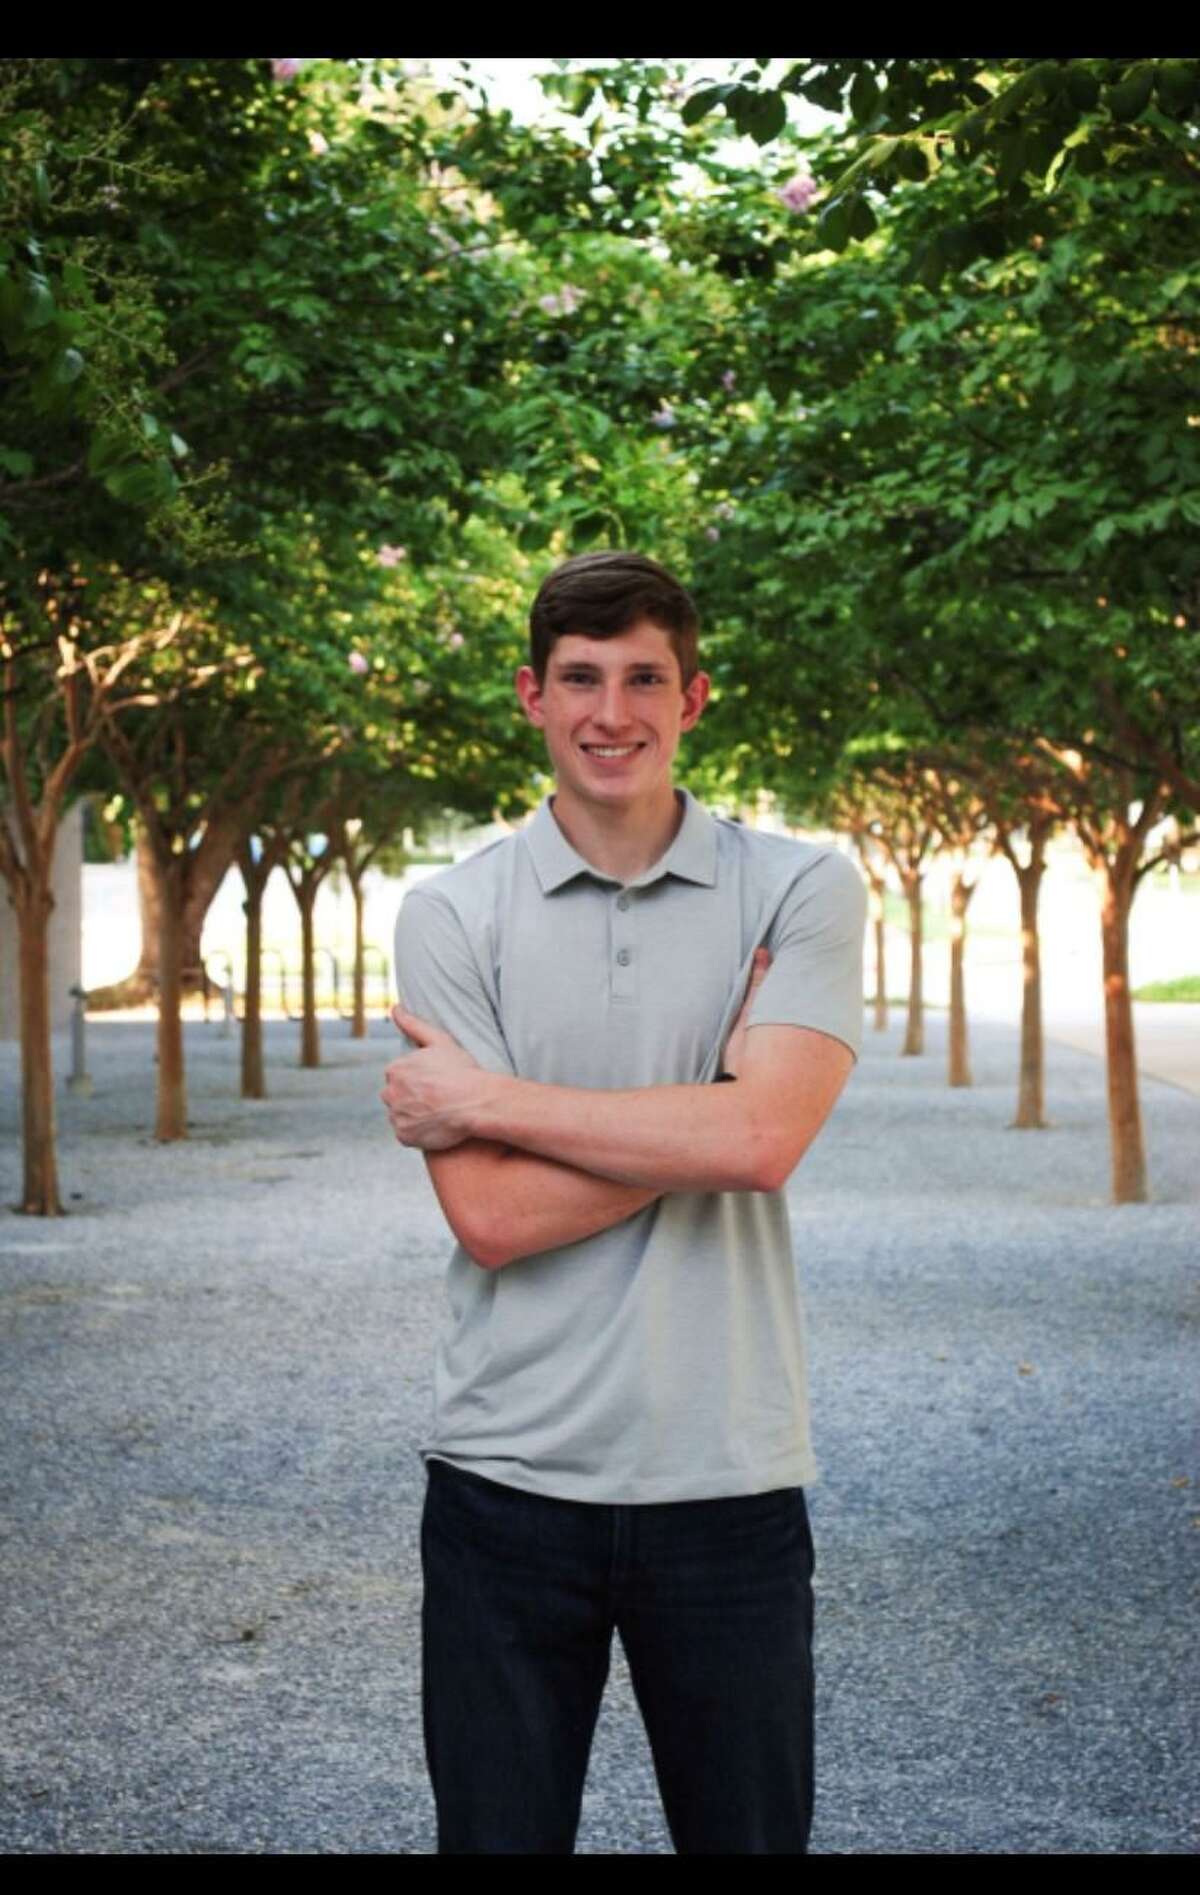 Graduating Friendswood High senior Luke Lipetska is preparing to attend Air Force Academy. His adventures as a Mustang included breaking both arms playing basketball and tutoring elementary school kids in math.